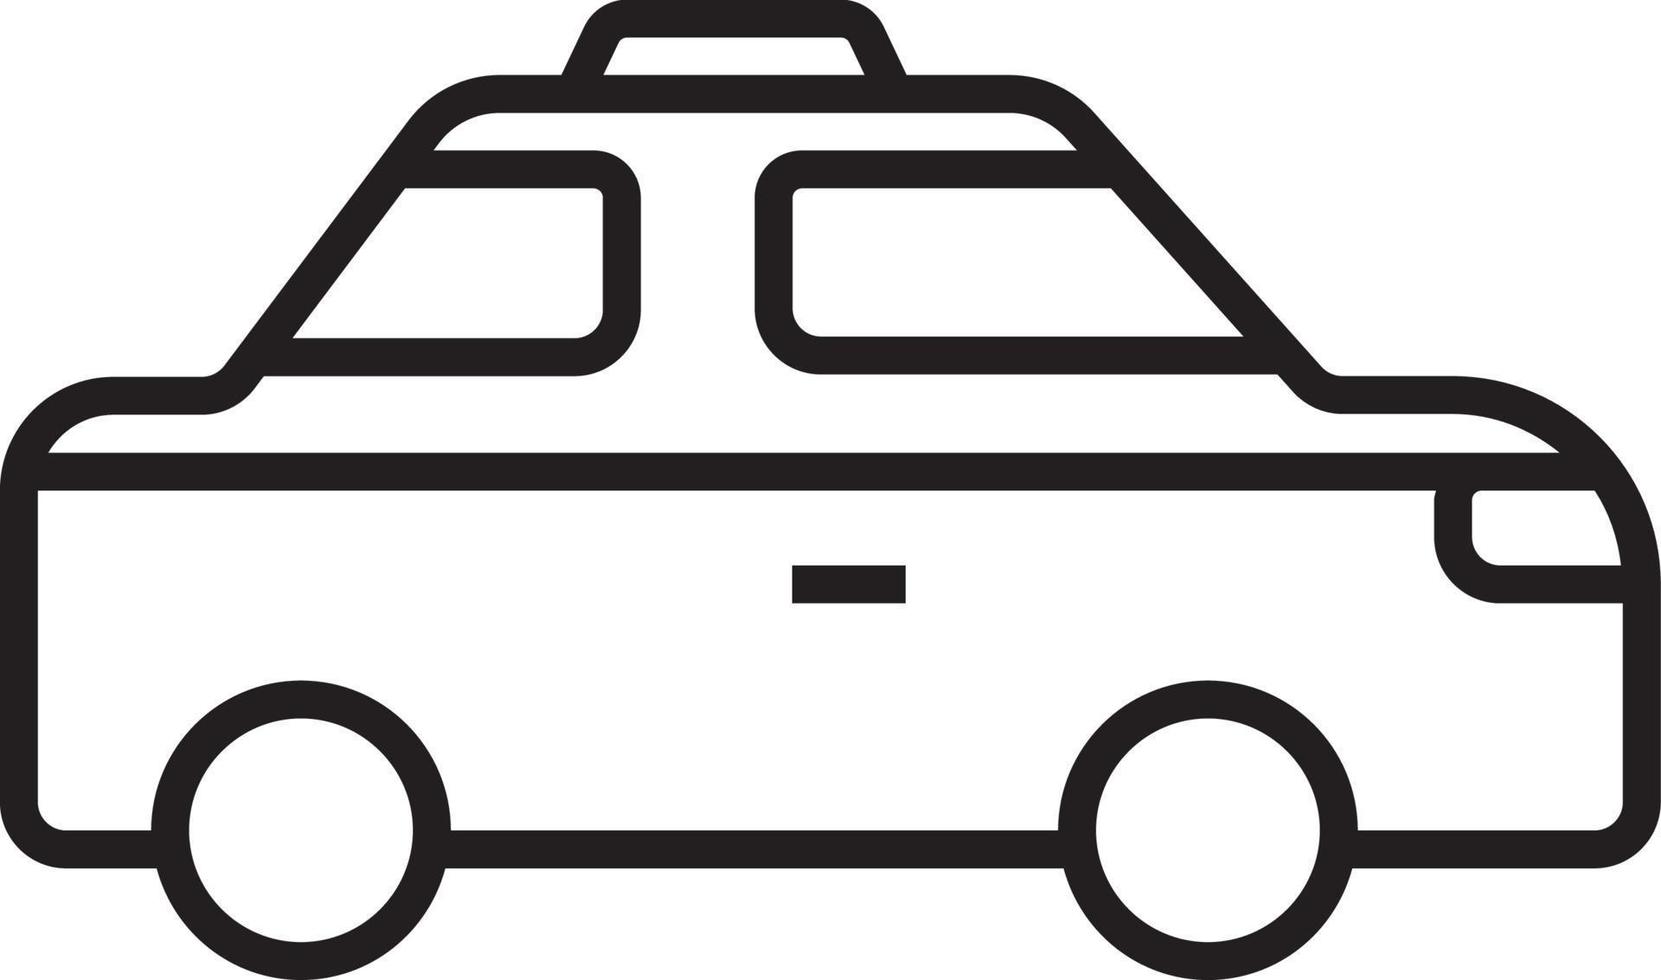 Taxi Transportation icon people icons with black outline style. Vehicle, symbol, transport, line, outline, station, travel, automobile, editable, pictogram, isolated, flat. Vector illustration